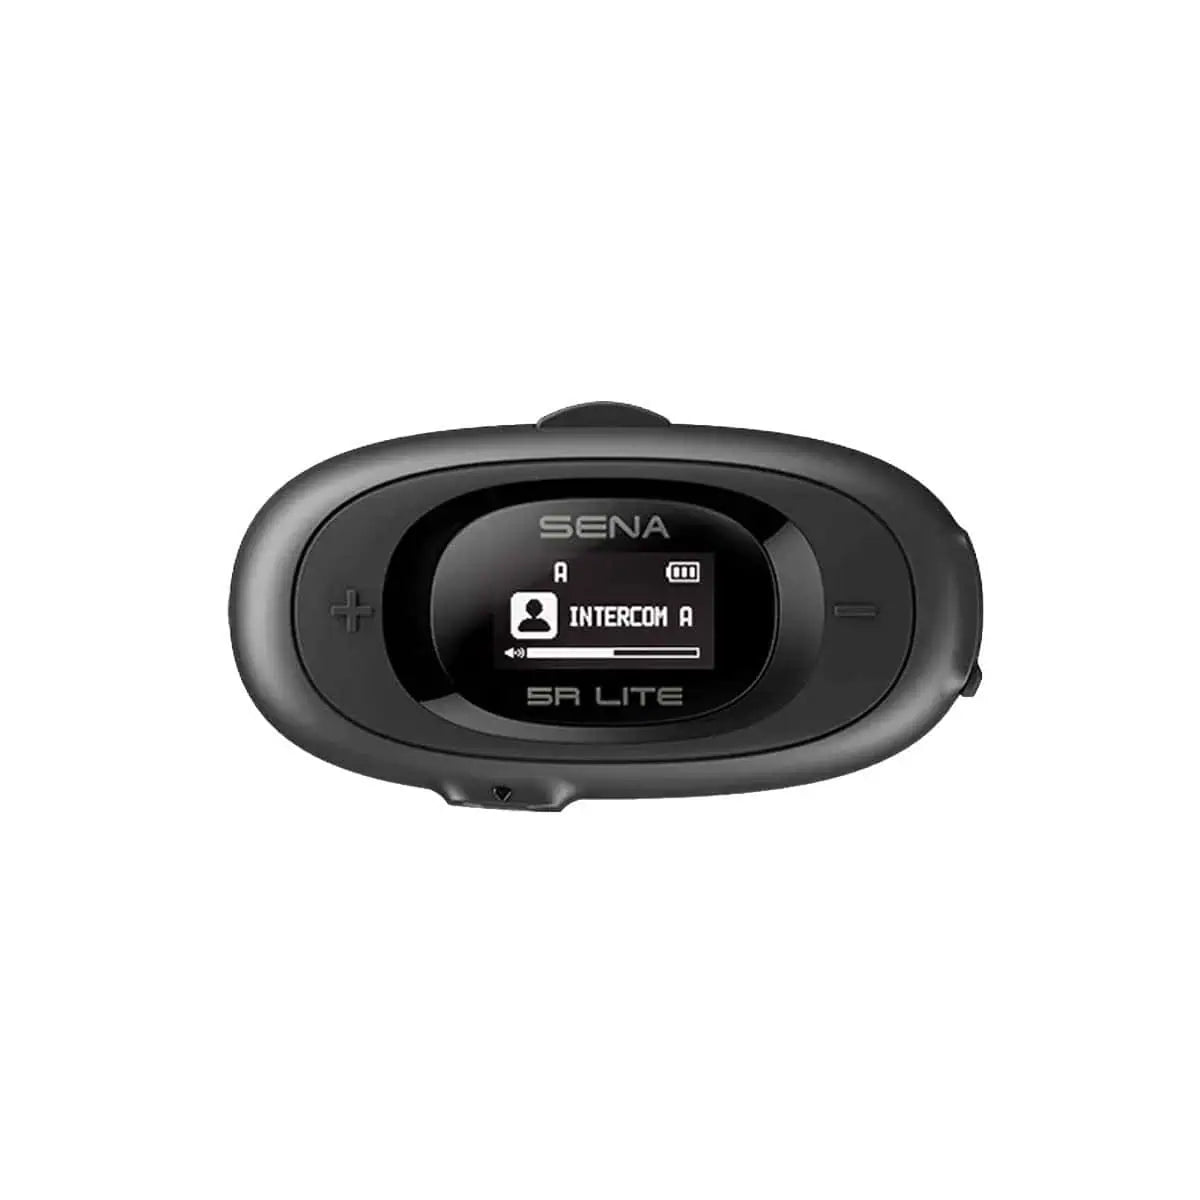 The Sena 5R Lite Bluetooth Headset: Sena's low profile price fighter with button controls